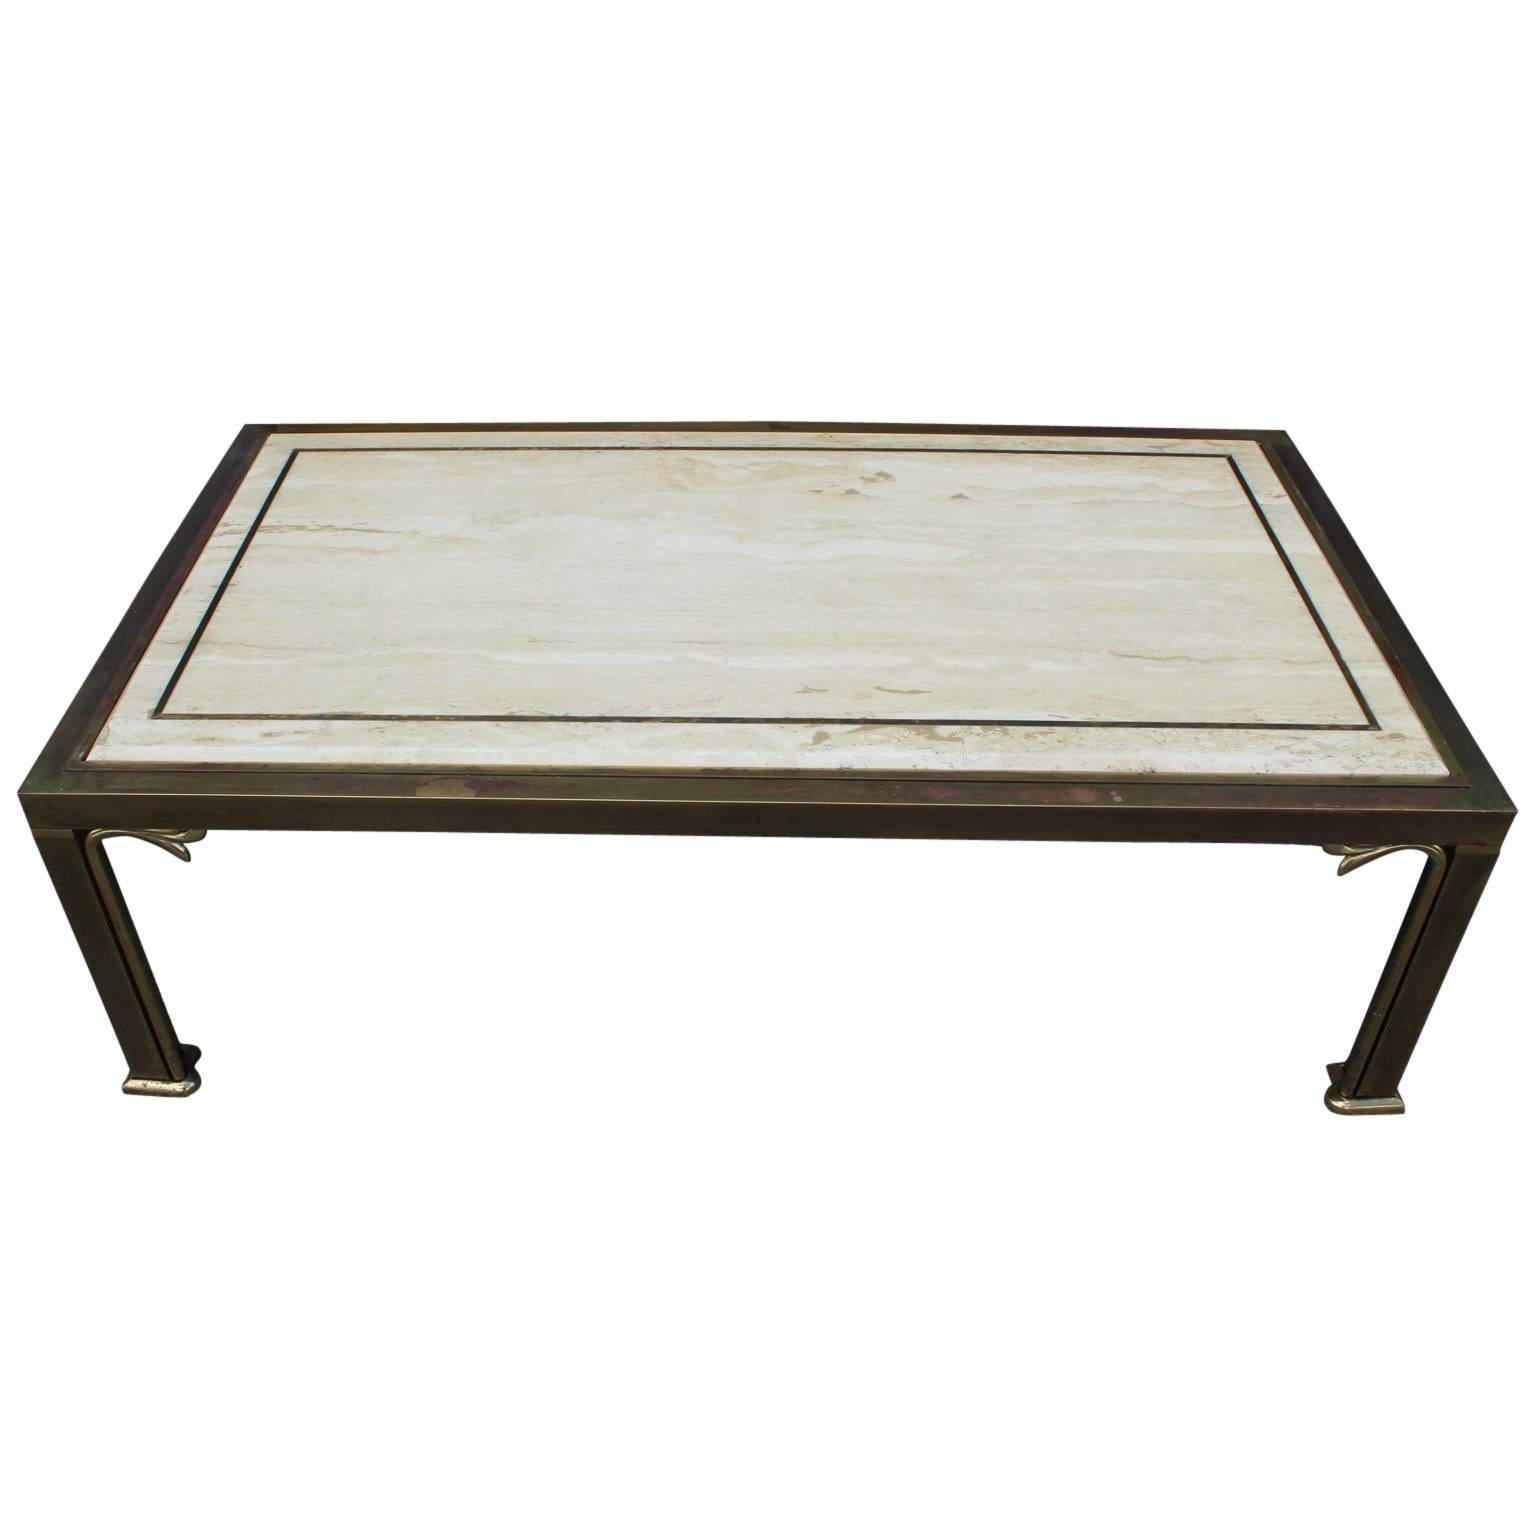 Glamorous Travertine and Brass Modern Coffee Table with Marble Top